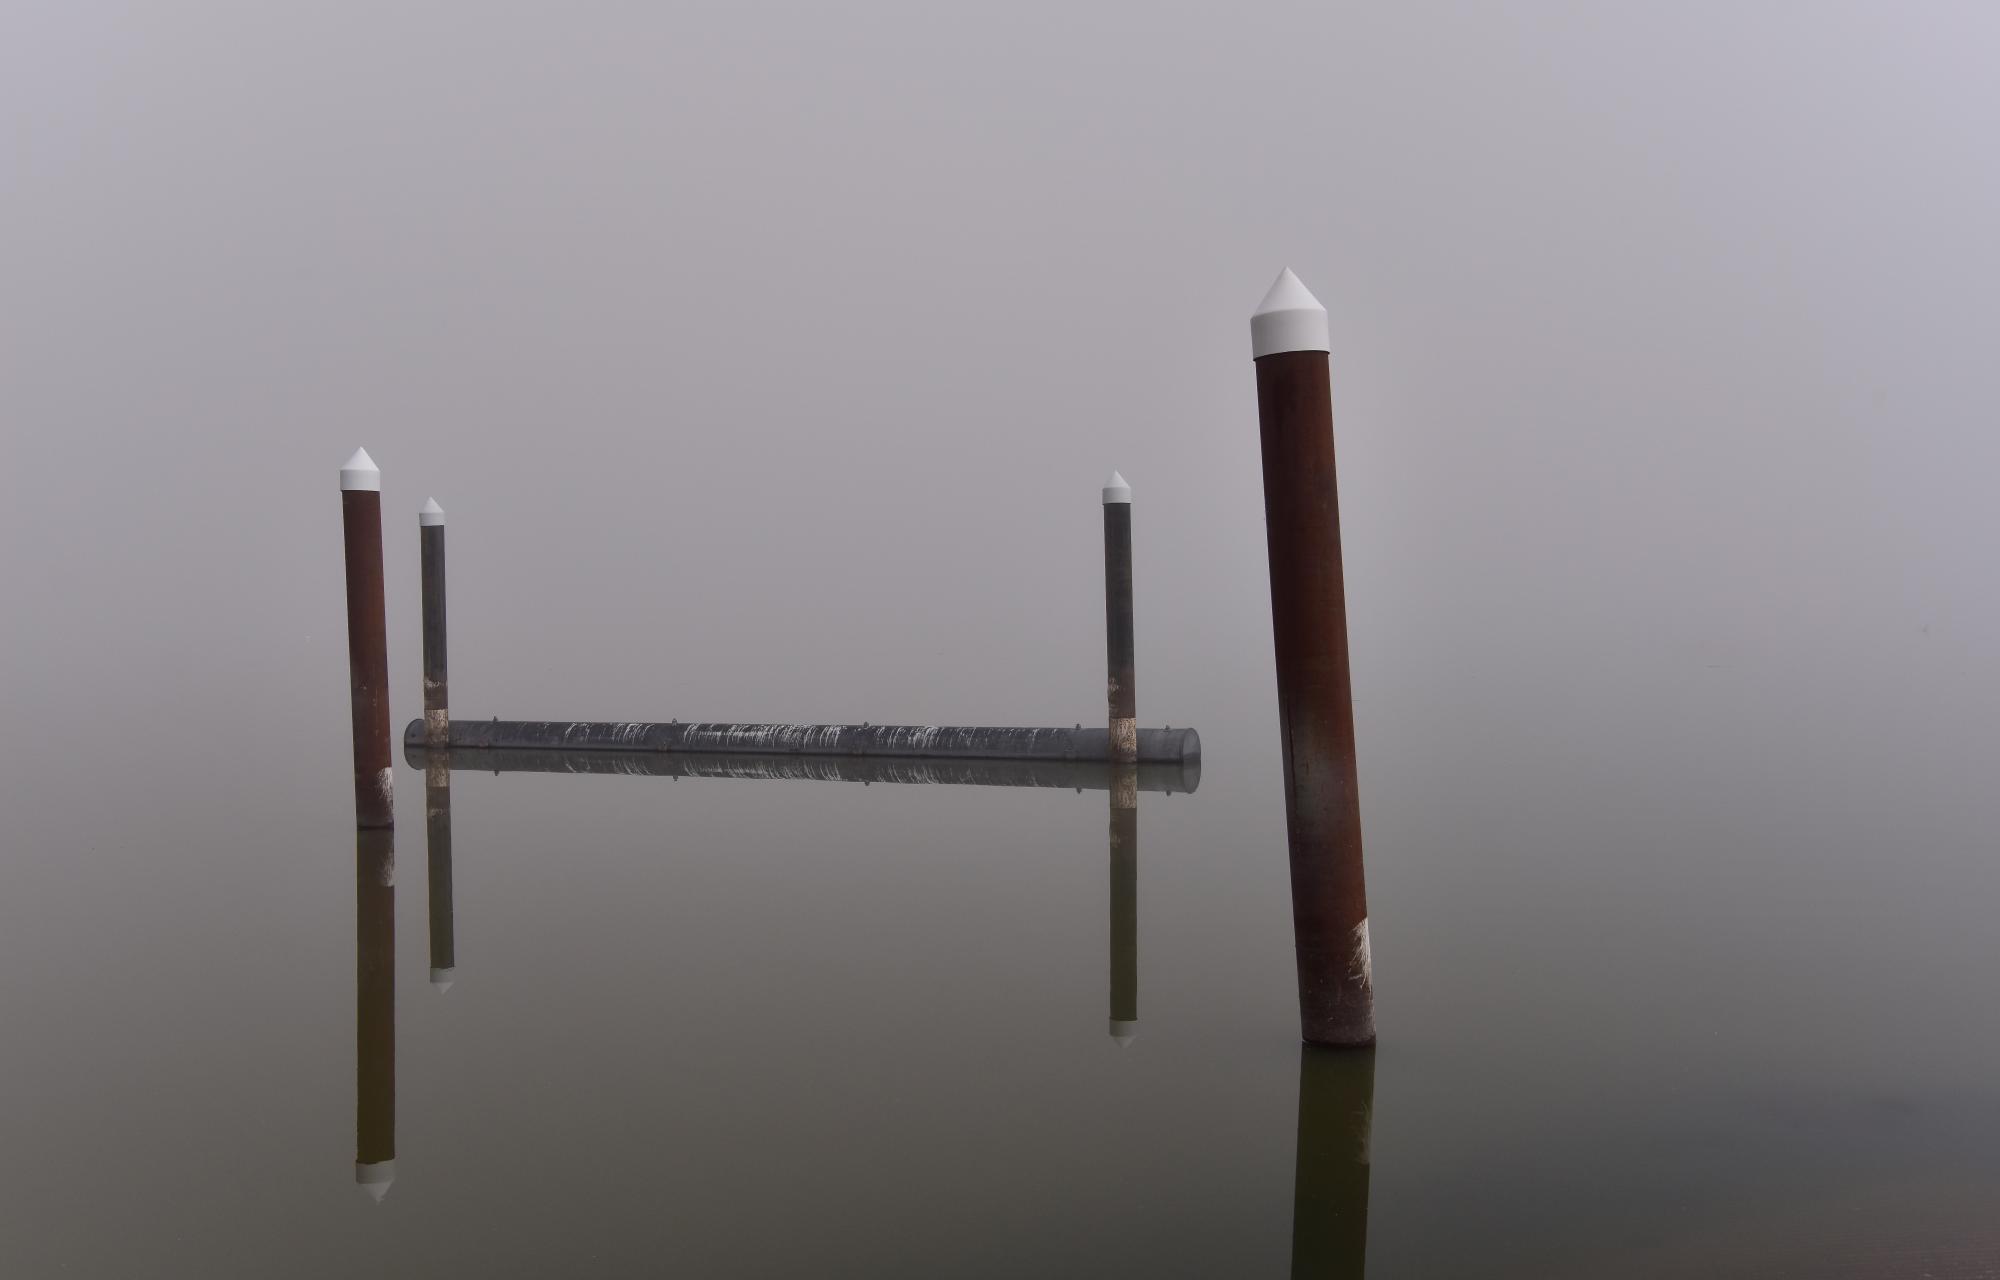 Photograph of pylons in a lake